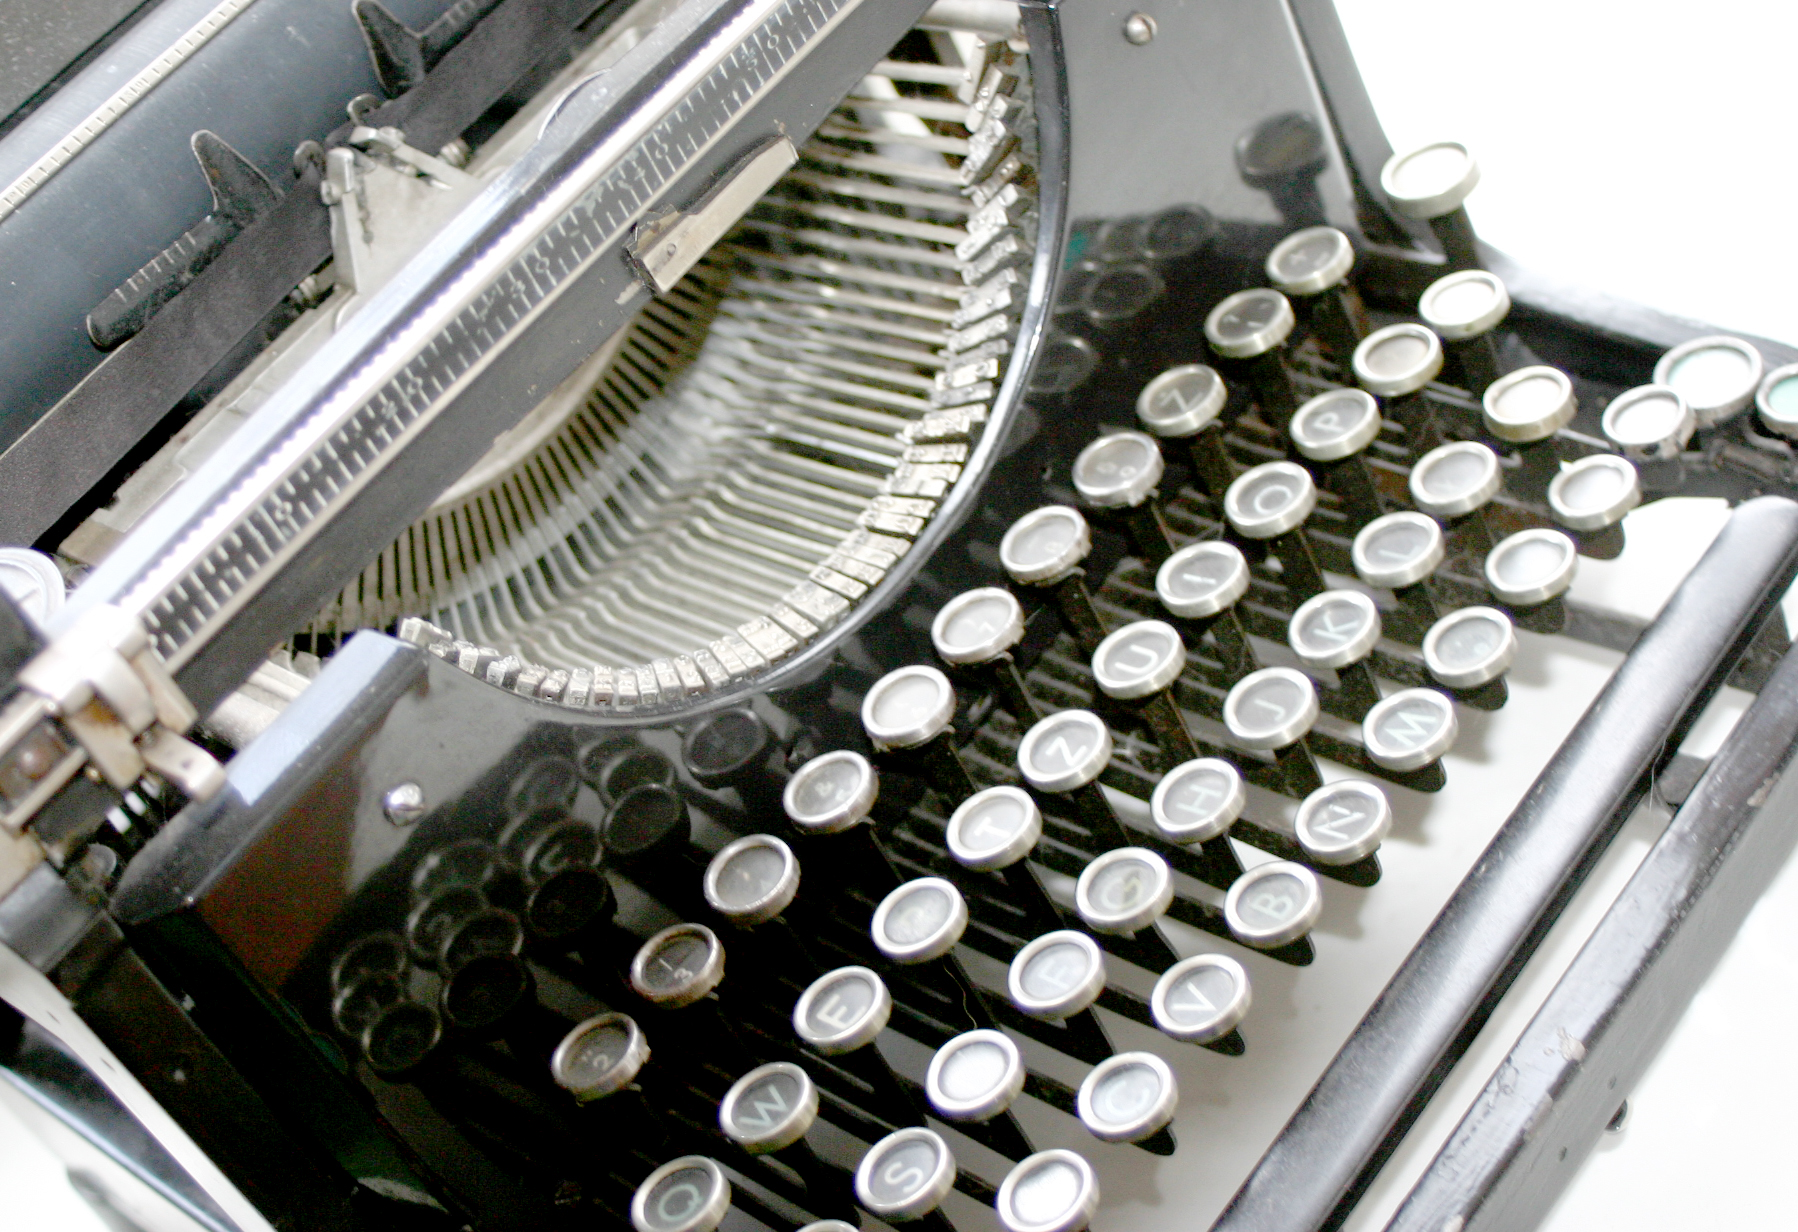 Shift Key: Journalists who write for businesses